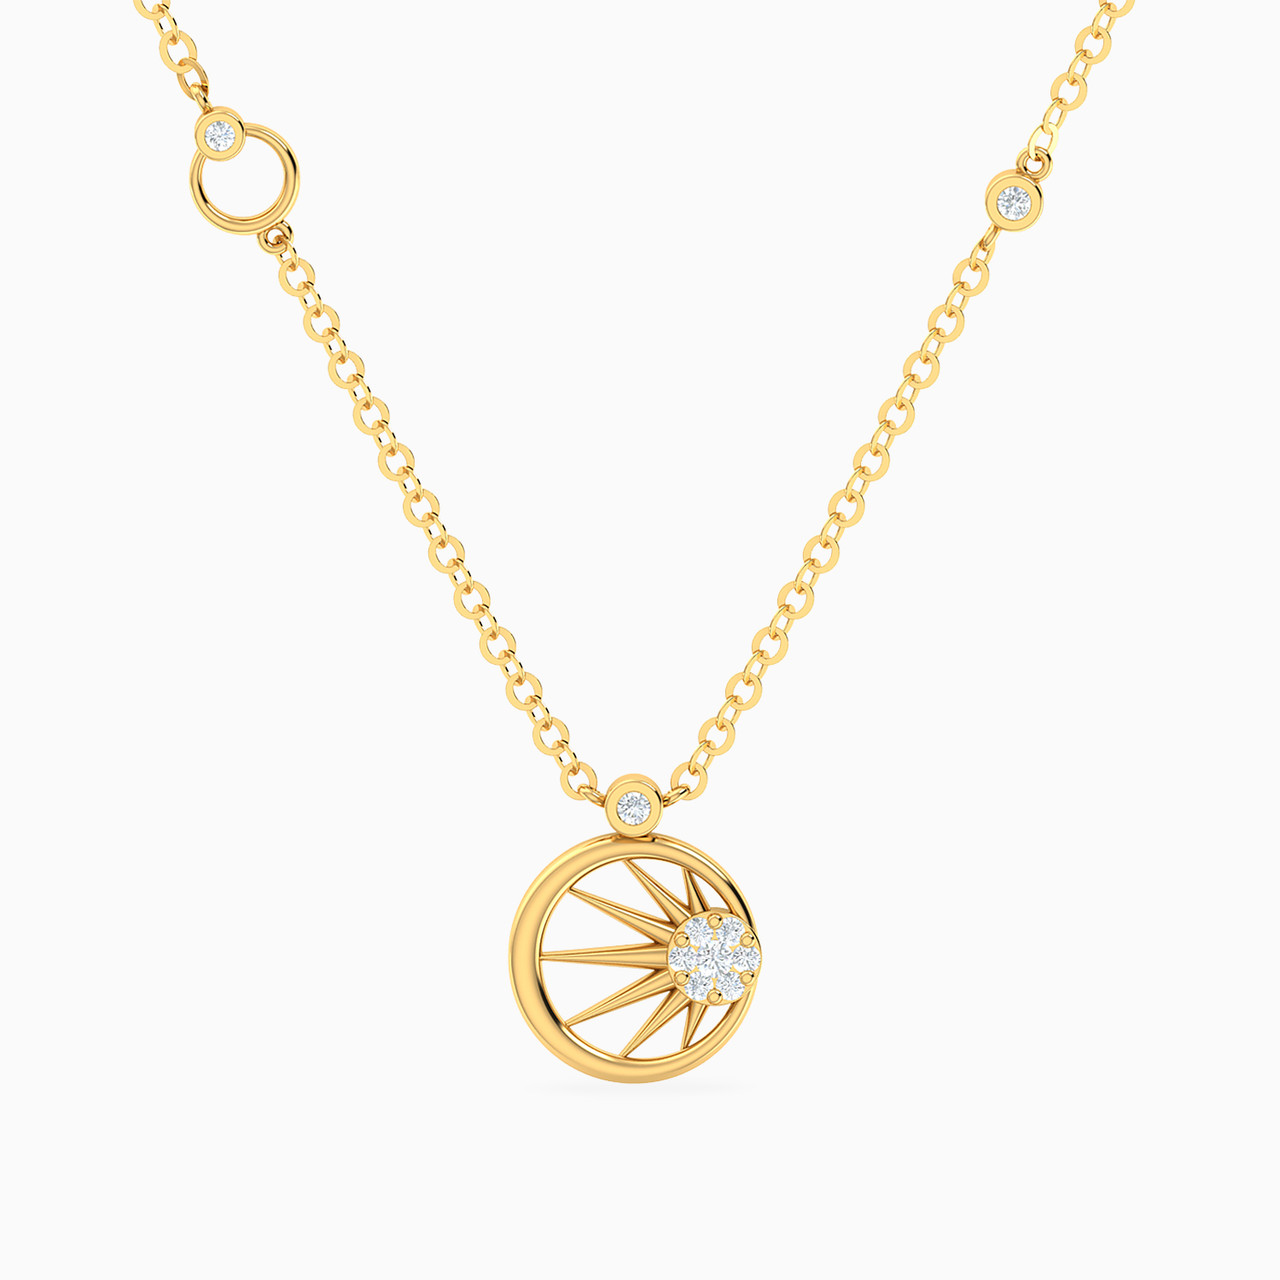 Round Shaped Diamond Pendant Necklace with 18K Gold Chain